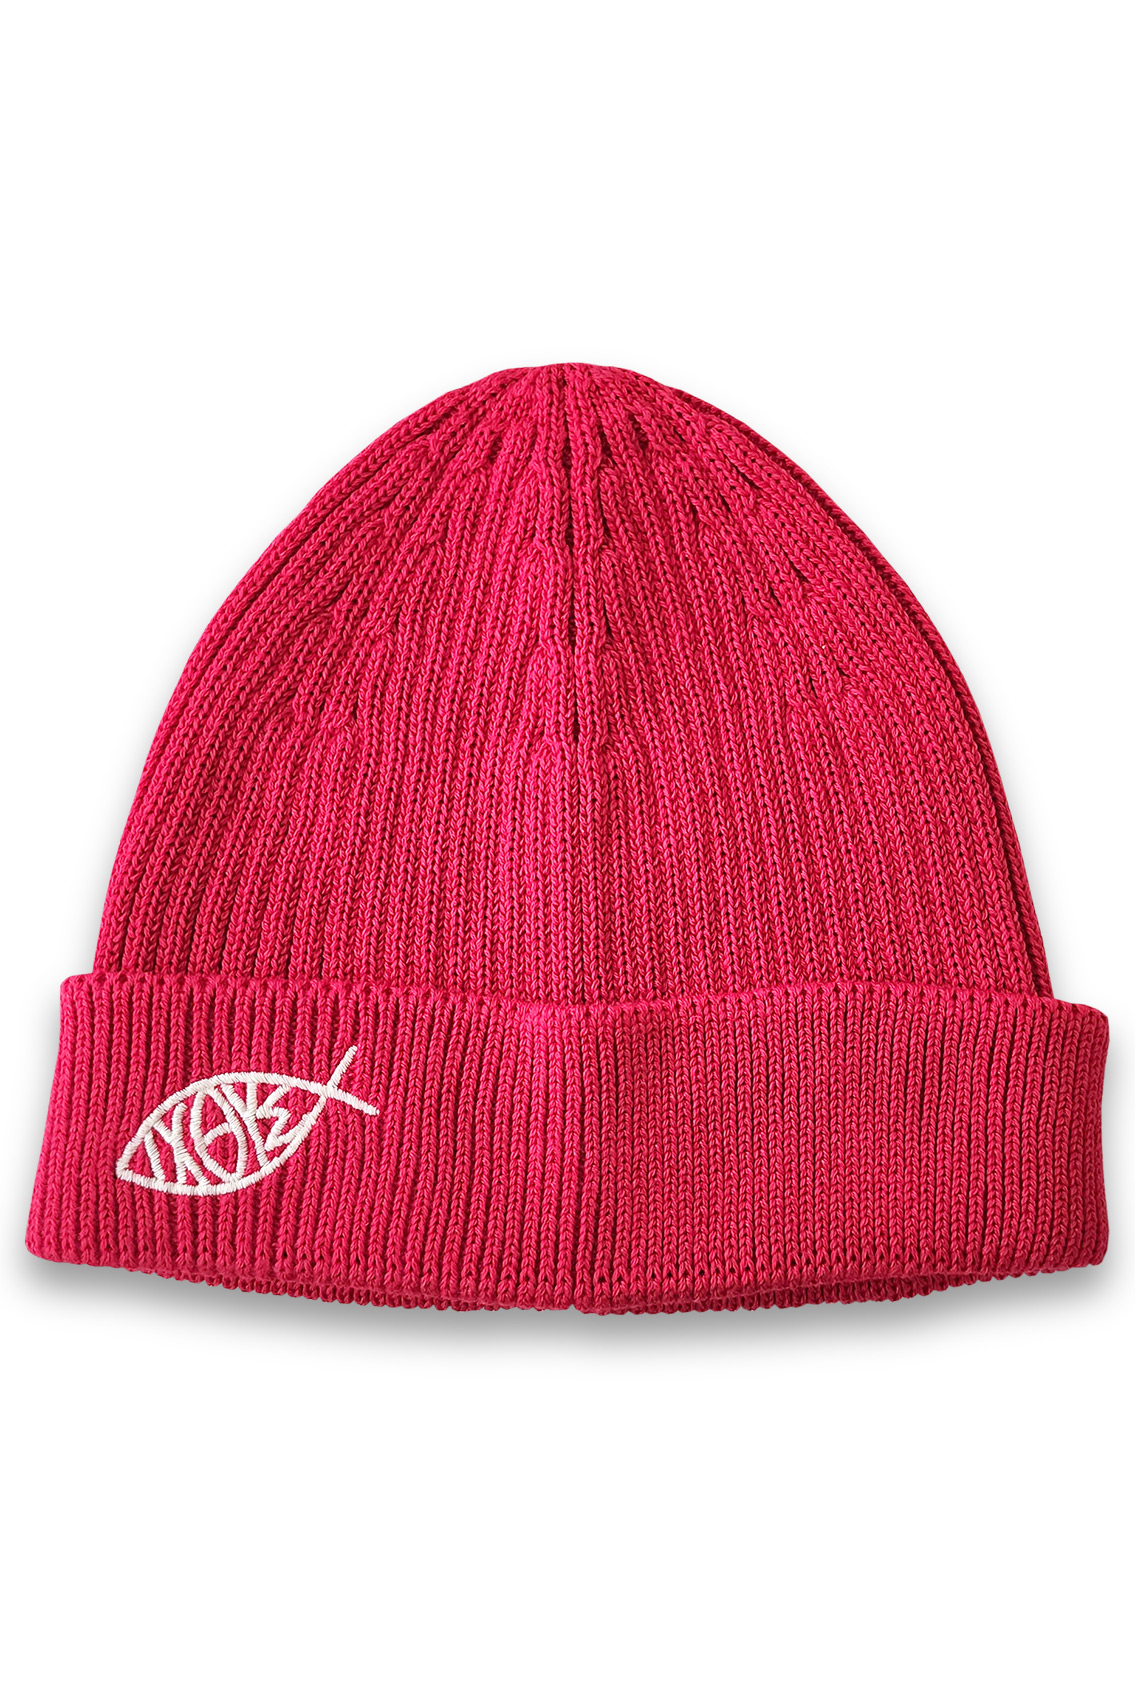 red knitted hat with Ιχθύς symbol